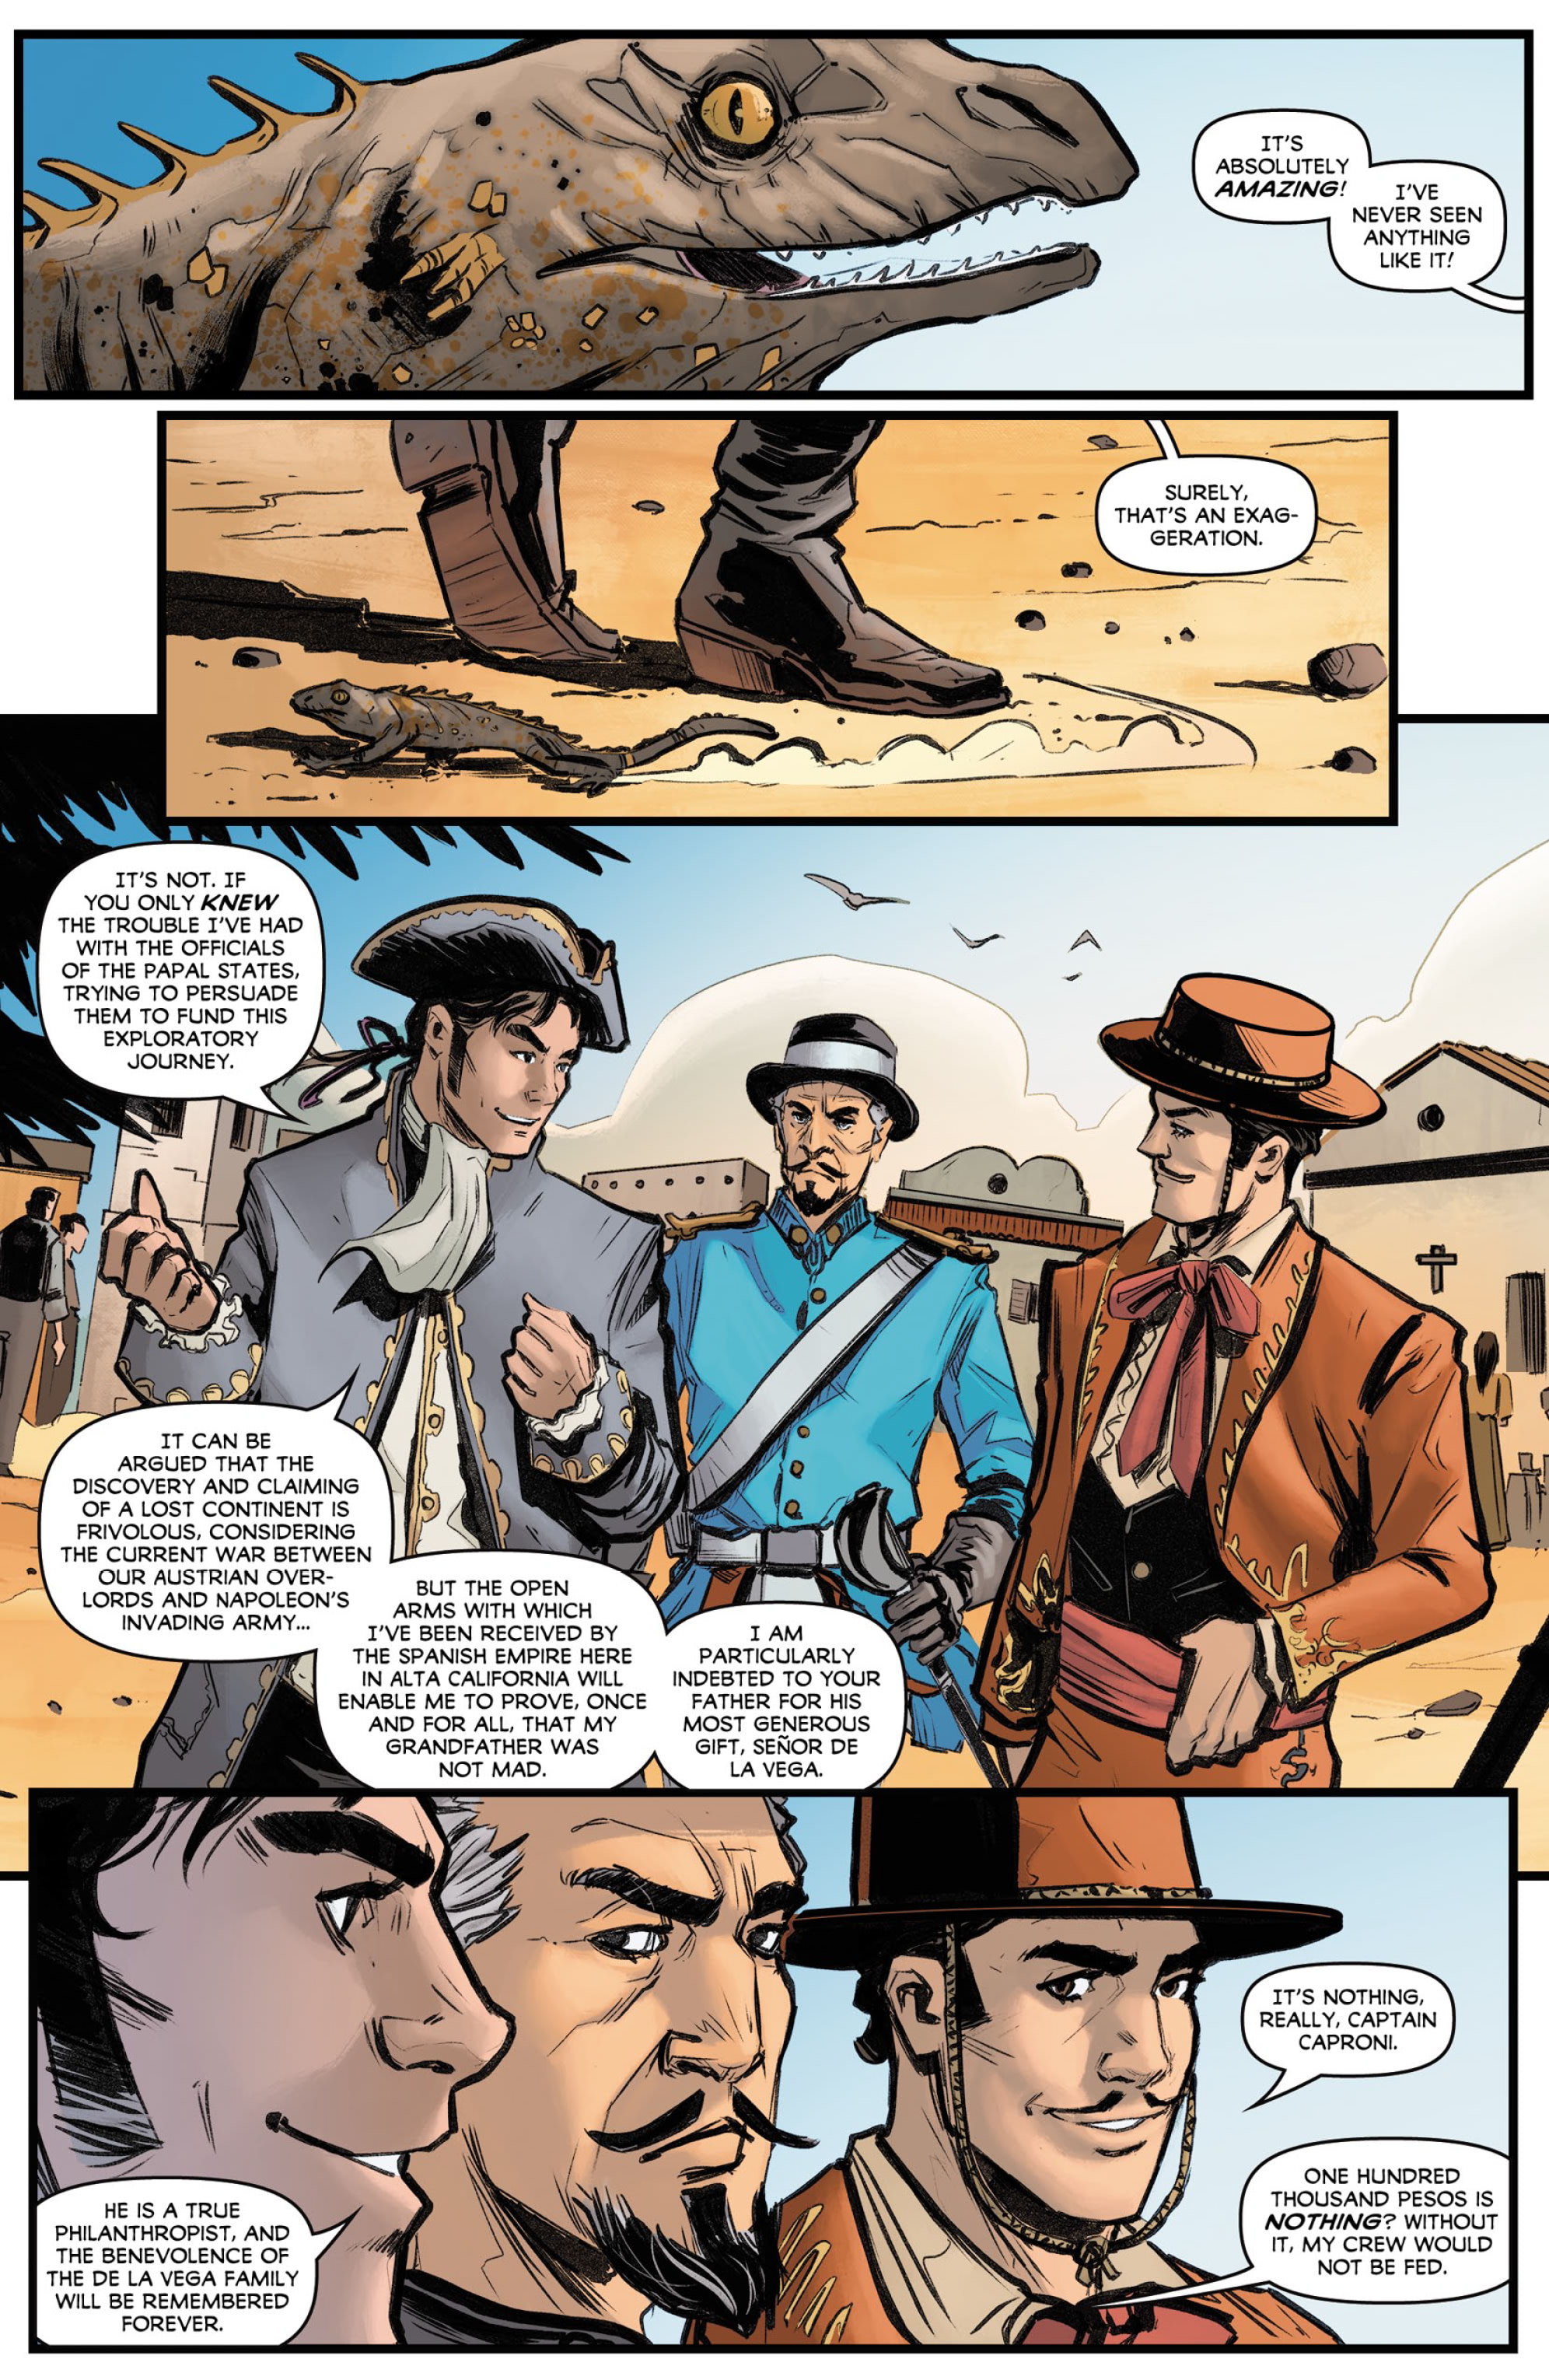 Zorro in the Land That Time Forgot (2020-): Chapter 1 - Page 3